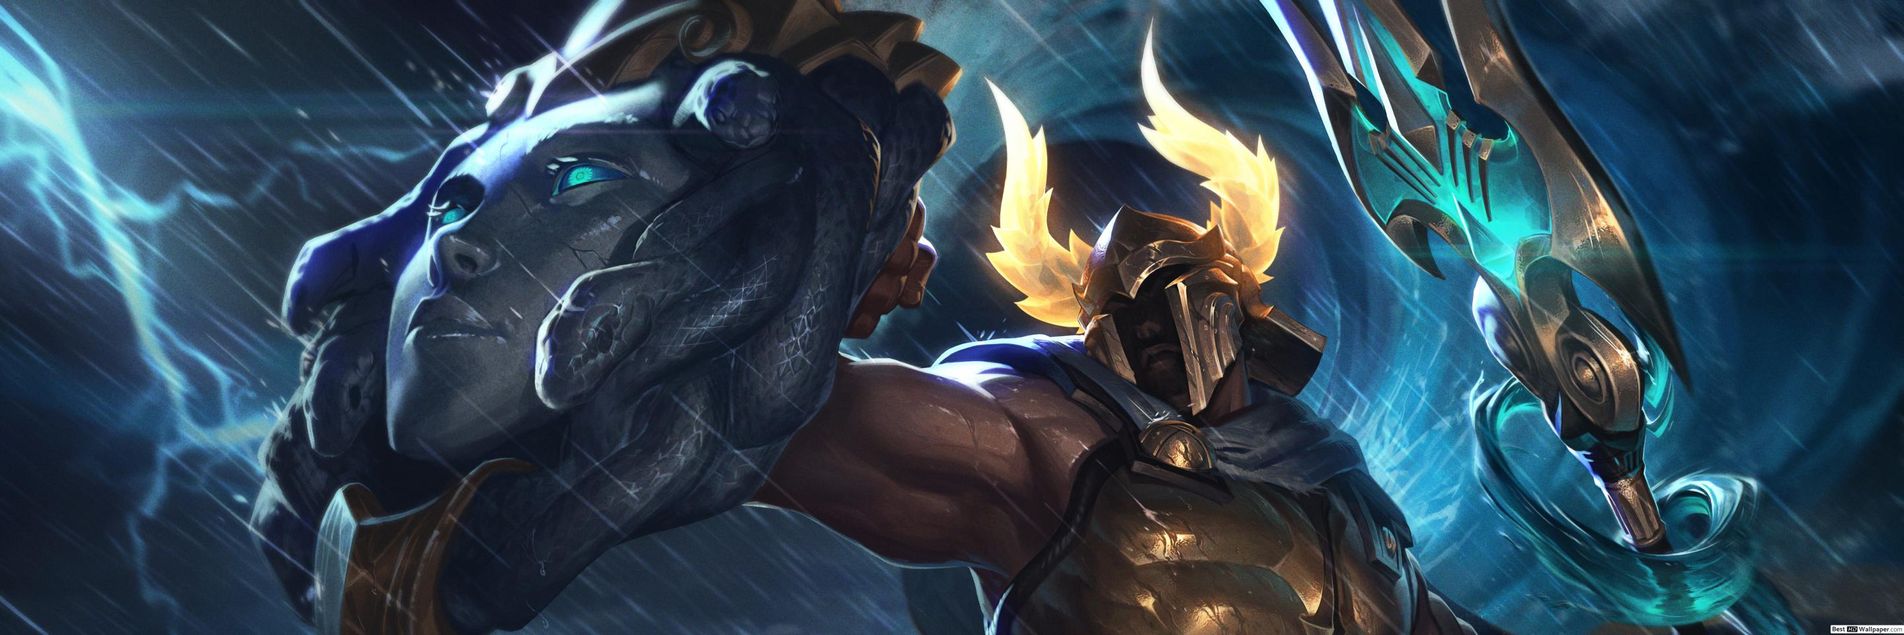 Pantheon Champ in LoL with Medusa Sheild and Spear with Lightning Behind Him